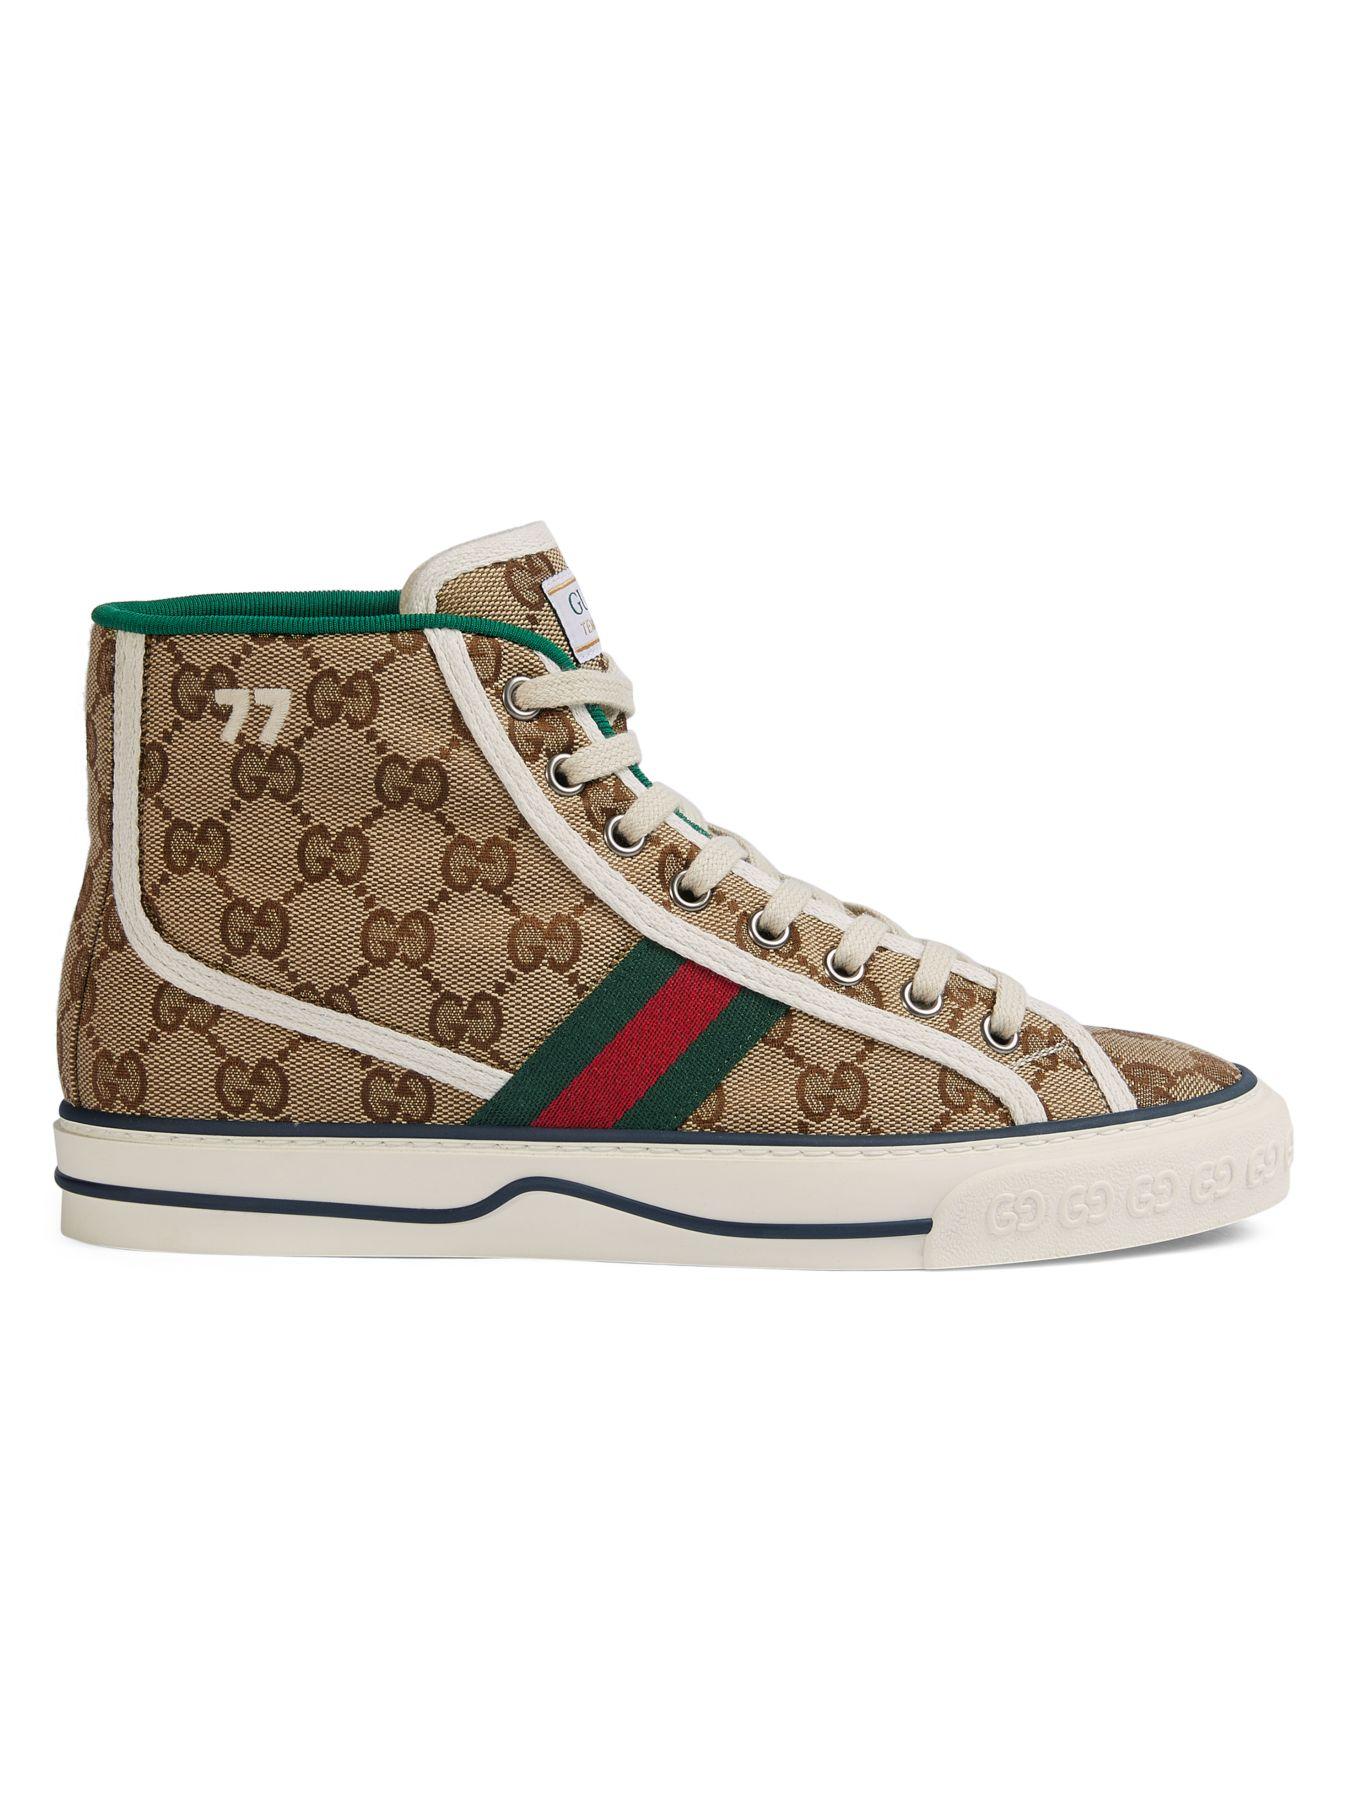 Gucci Canvas Tennis 1977 High-top Sneakers - Lyst